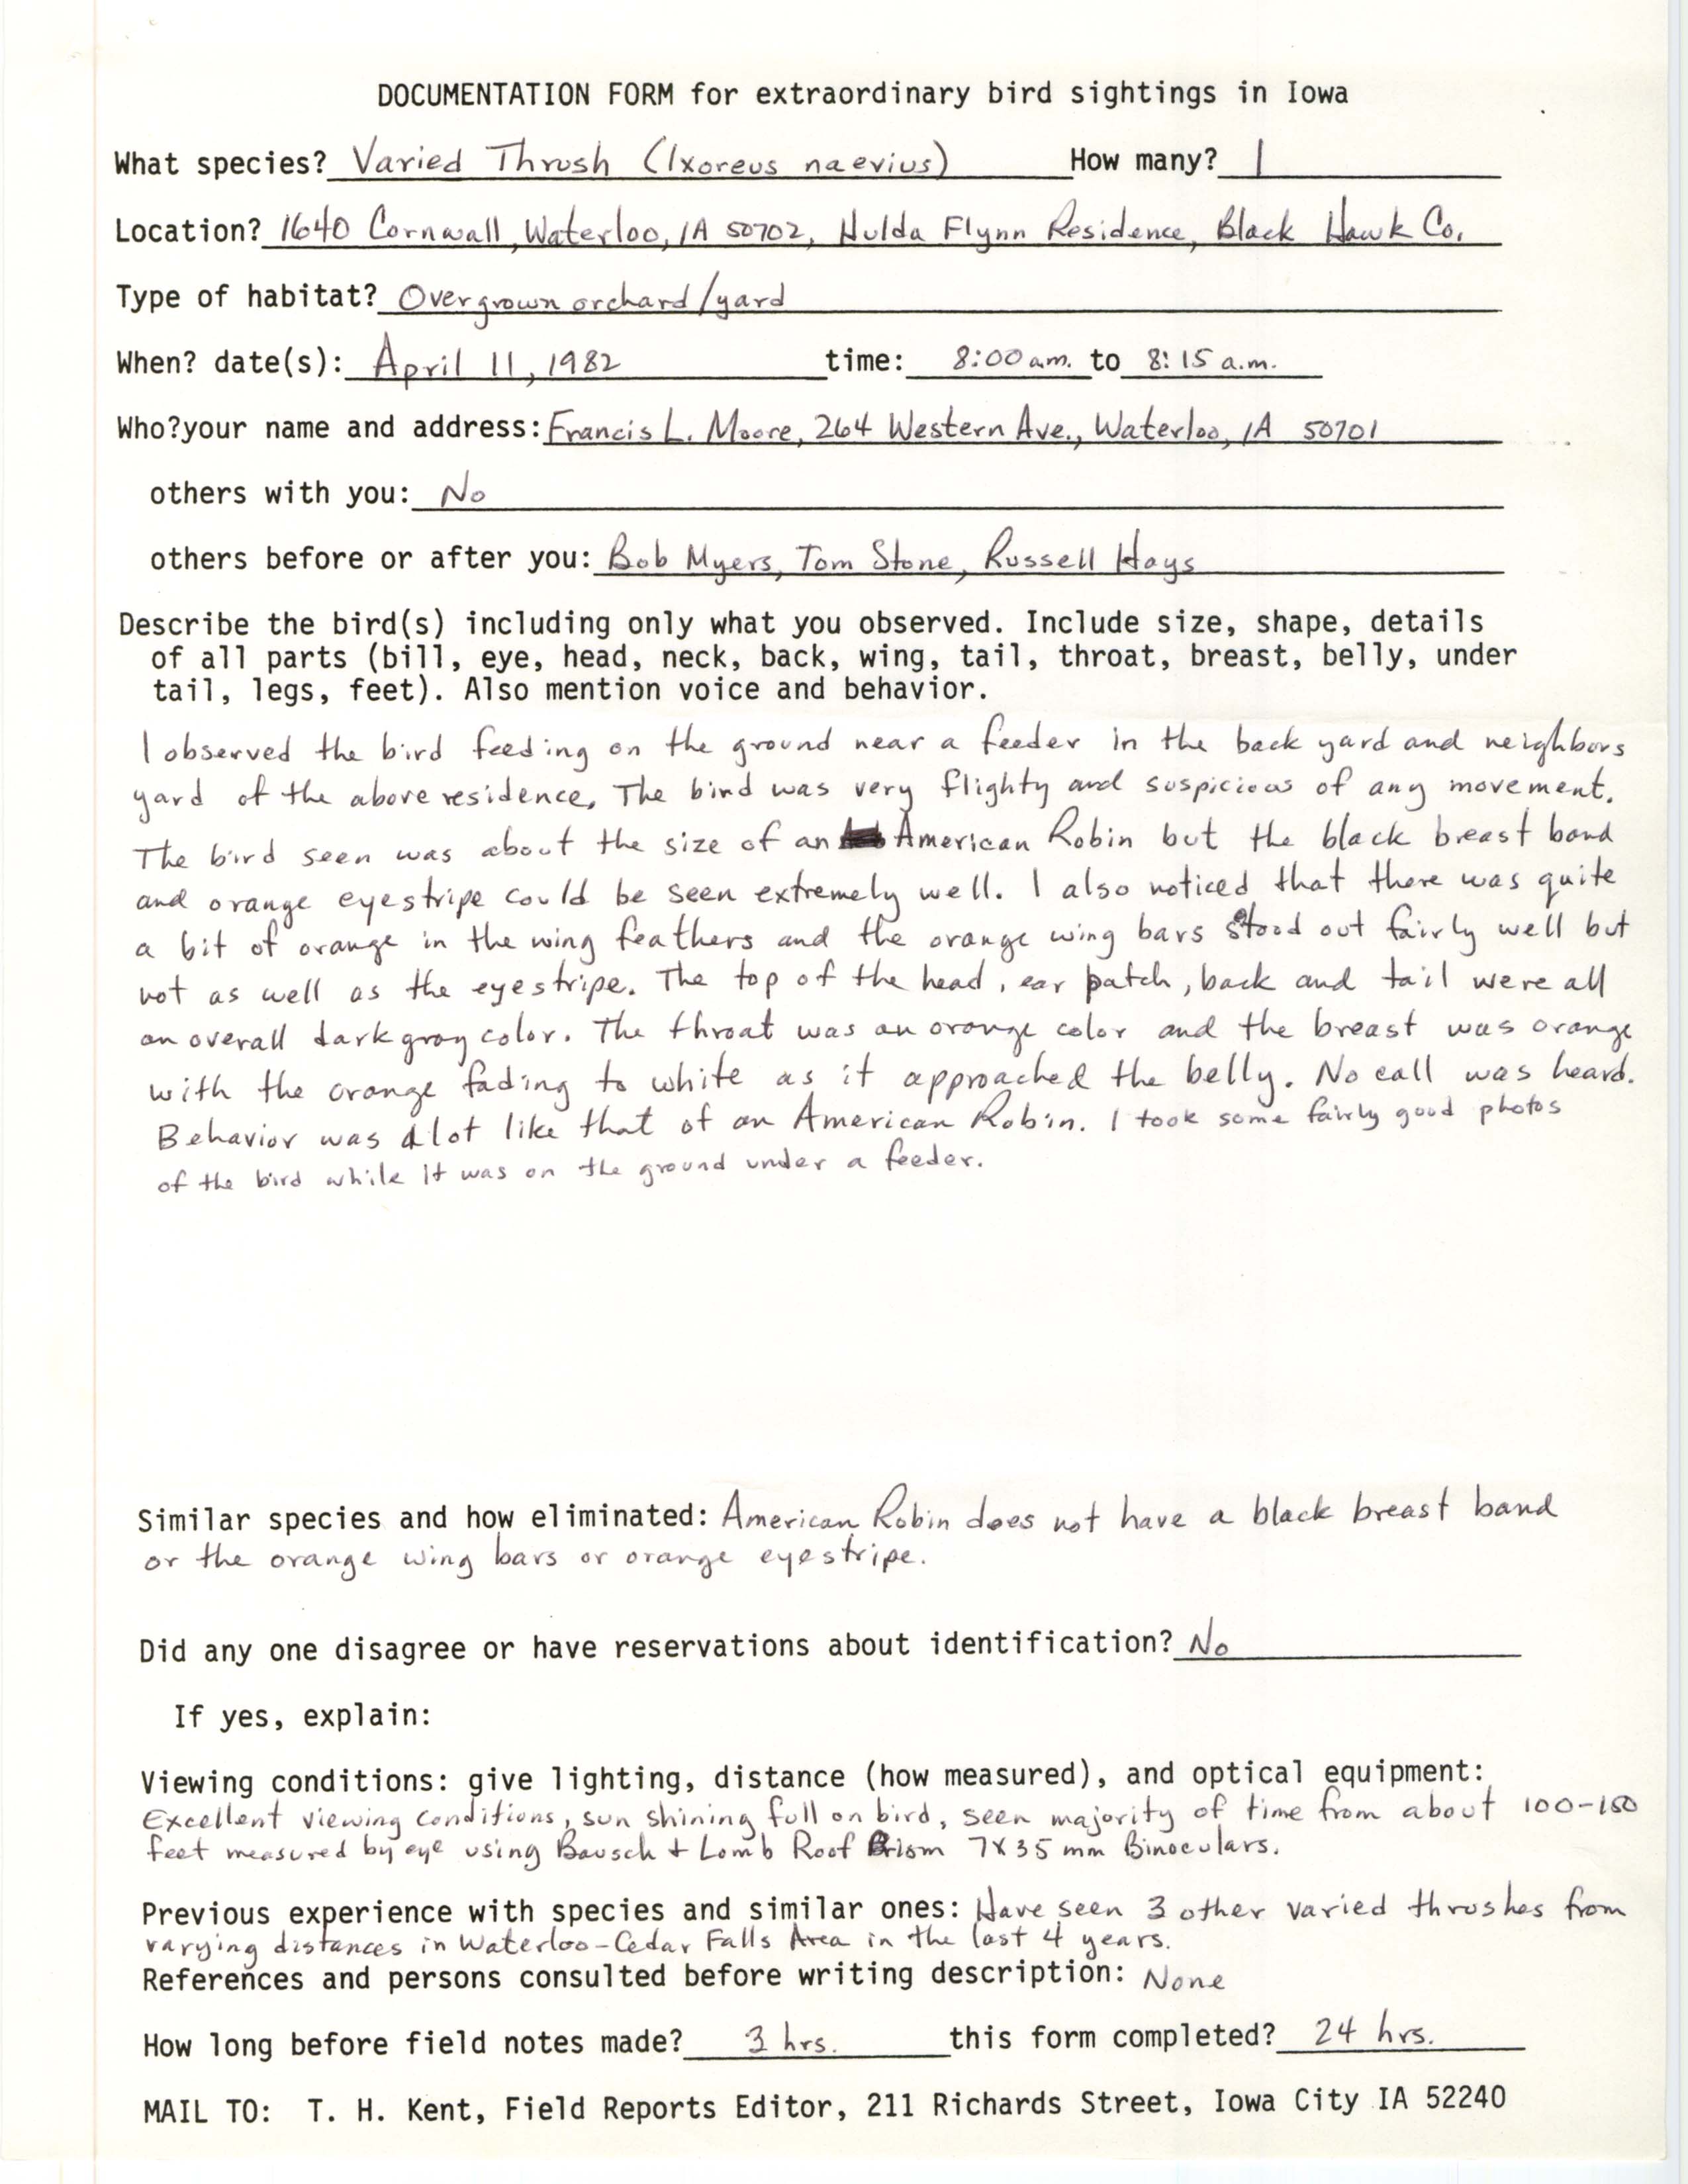 Rare bird documentation form for Varied Thrush at Waterloo in 1982